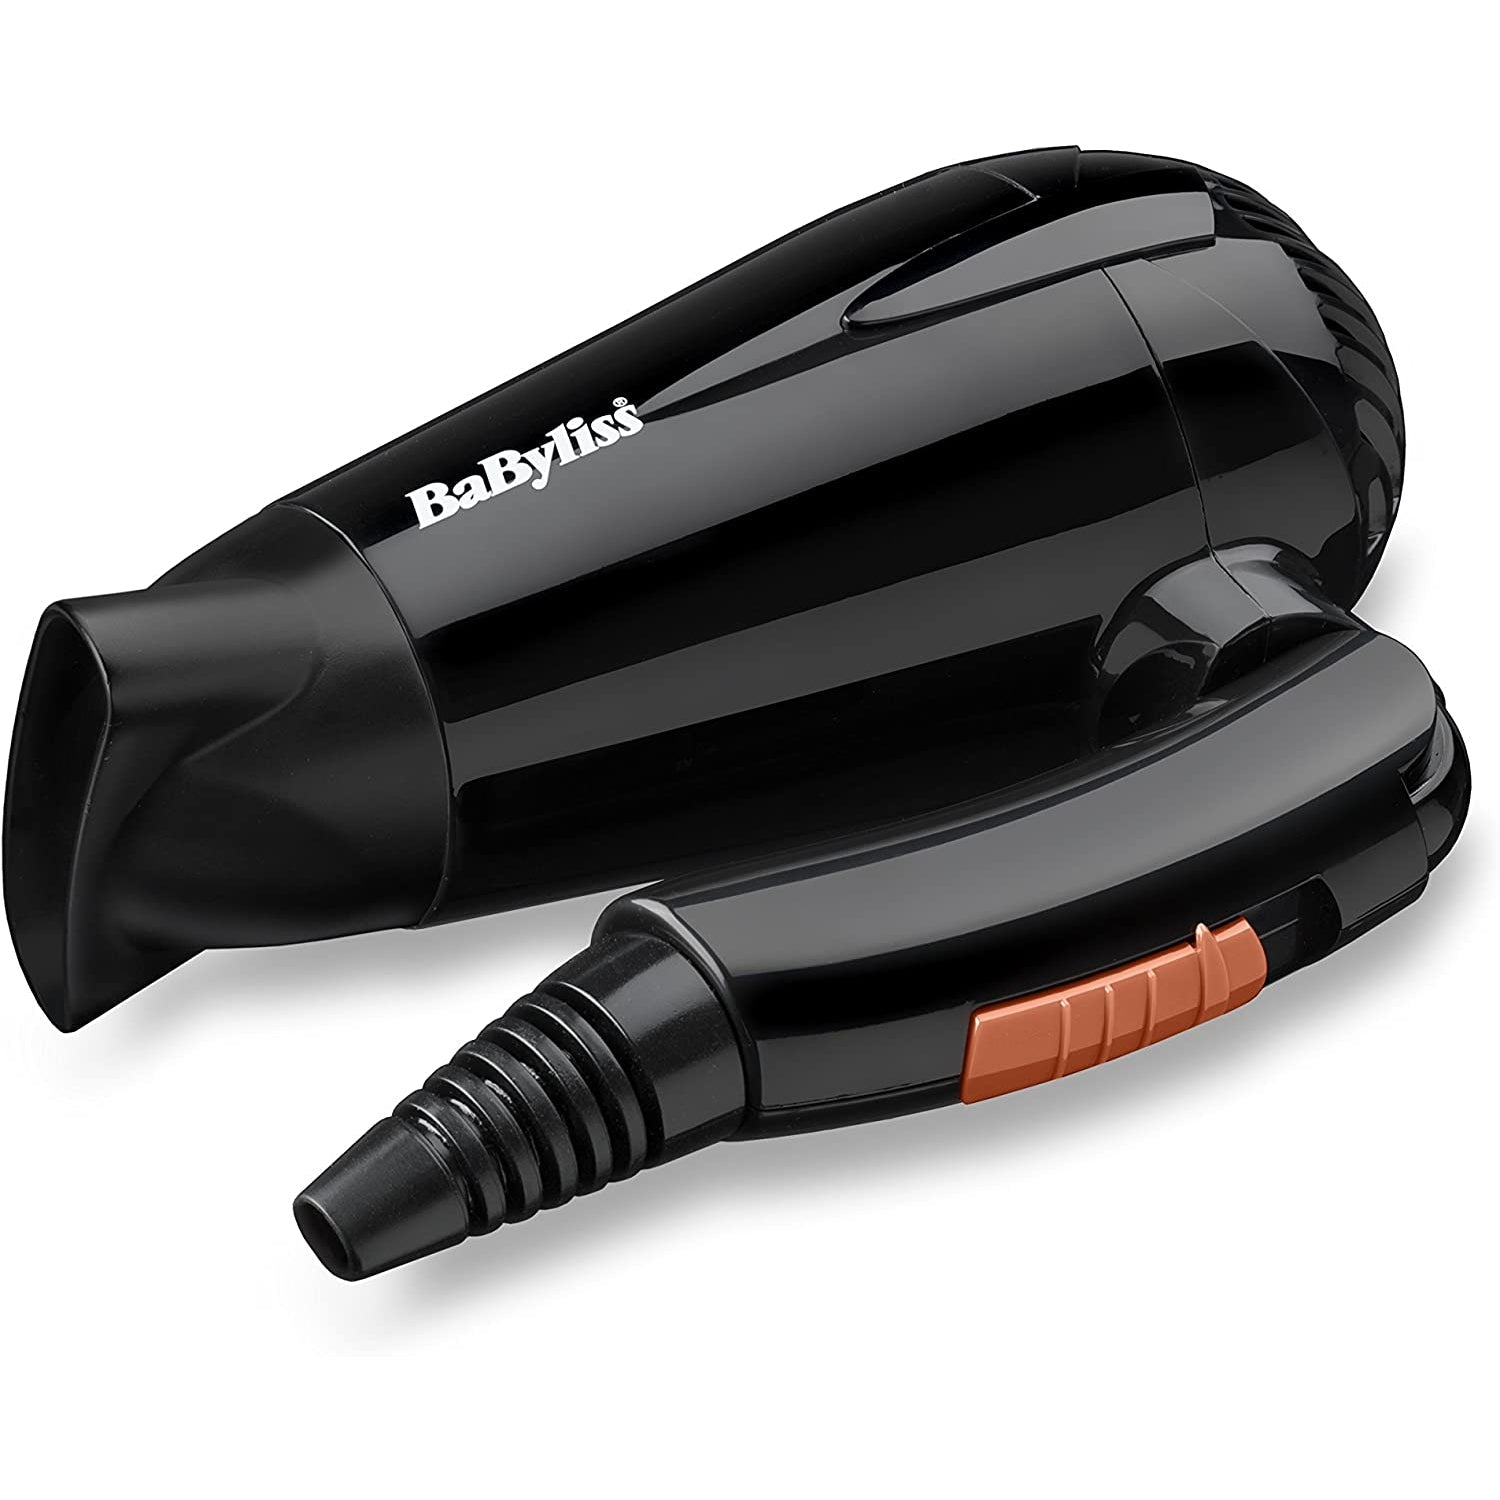 BaByliss Travel 2000 W Hair Dryer - Black - Healthxpress.ie